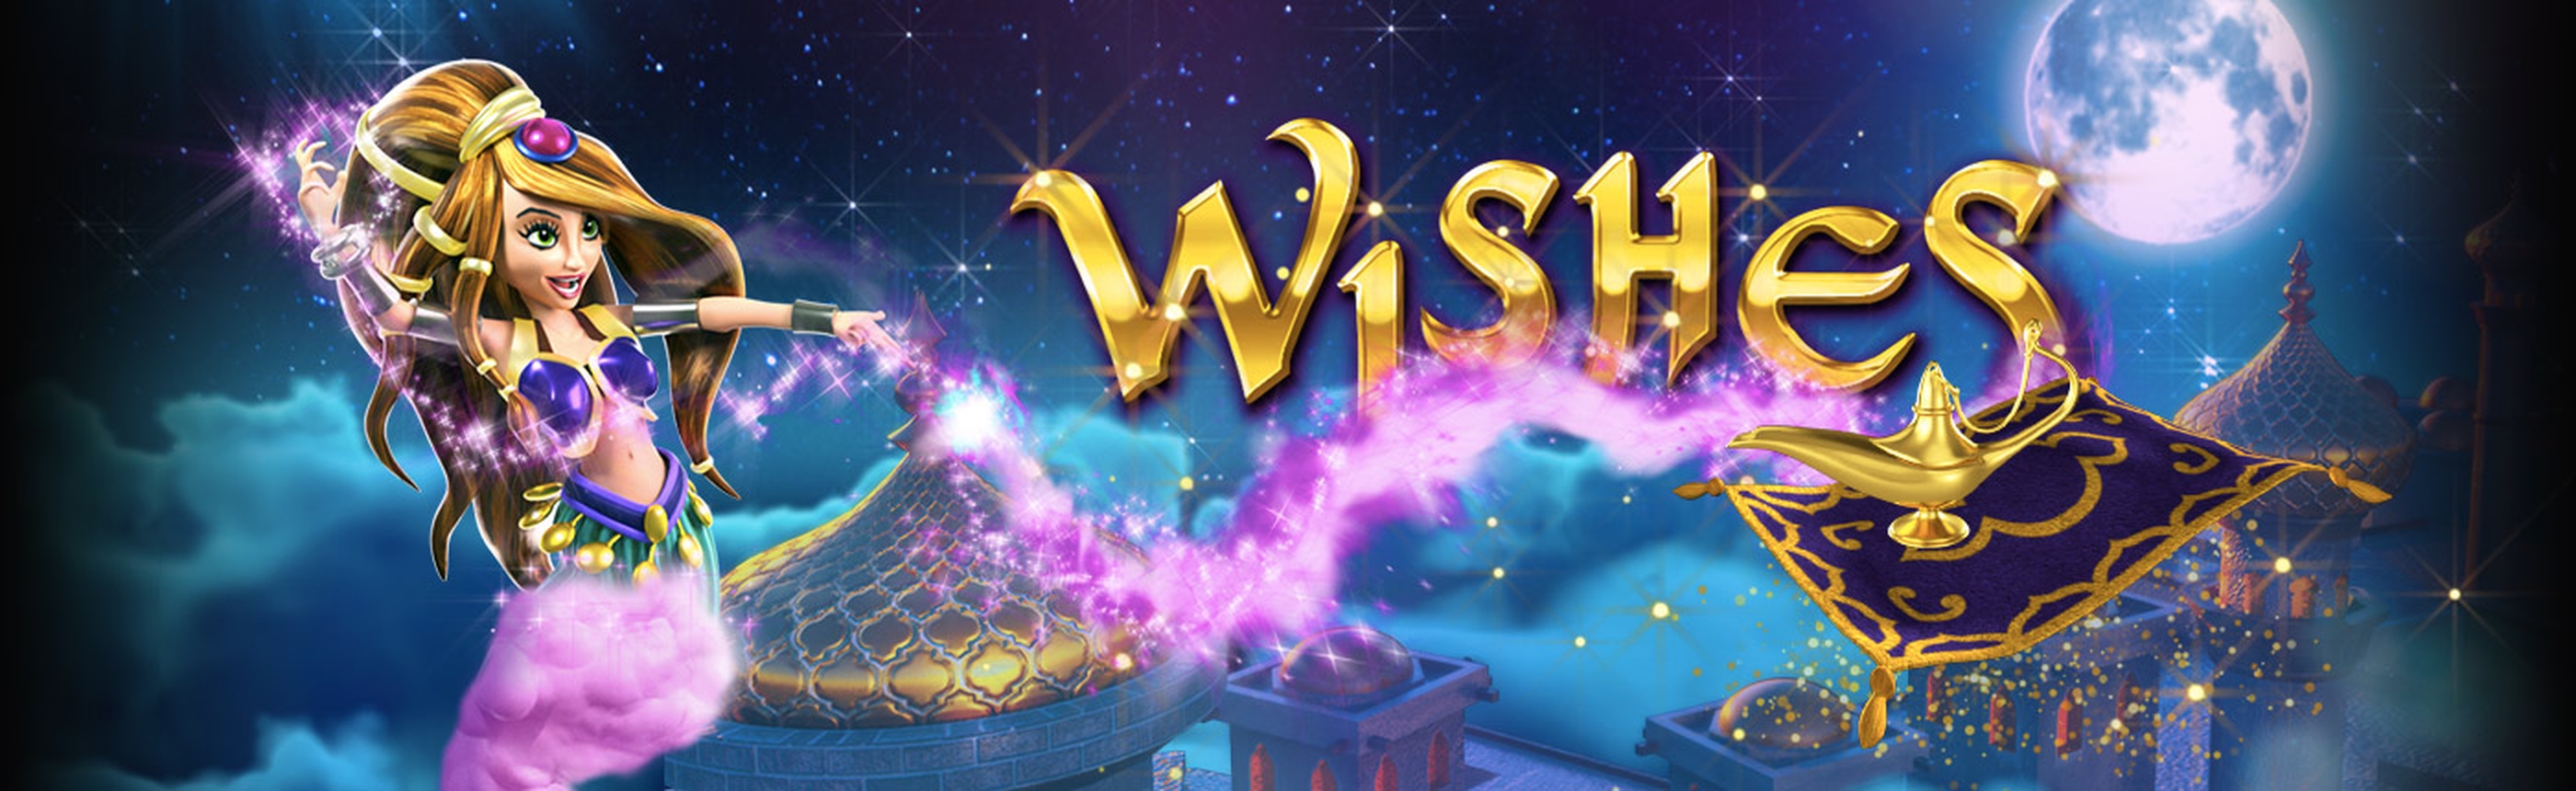 The Wishes Online Slot Demo Game by Revolver Gaming